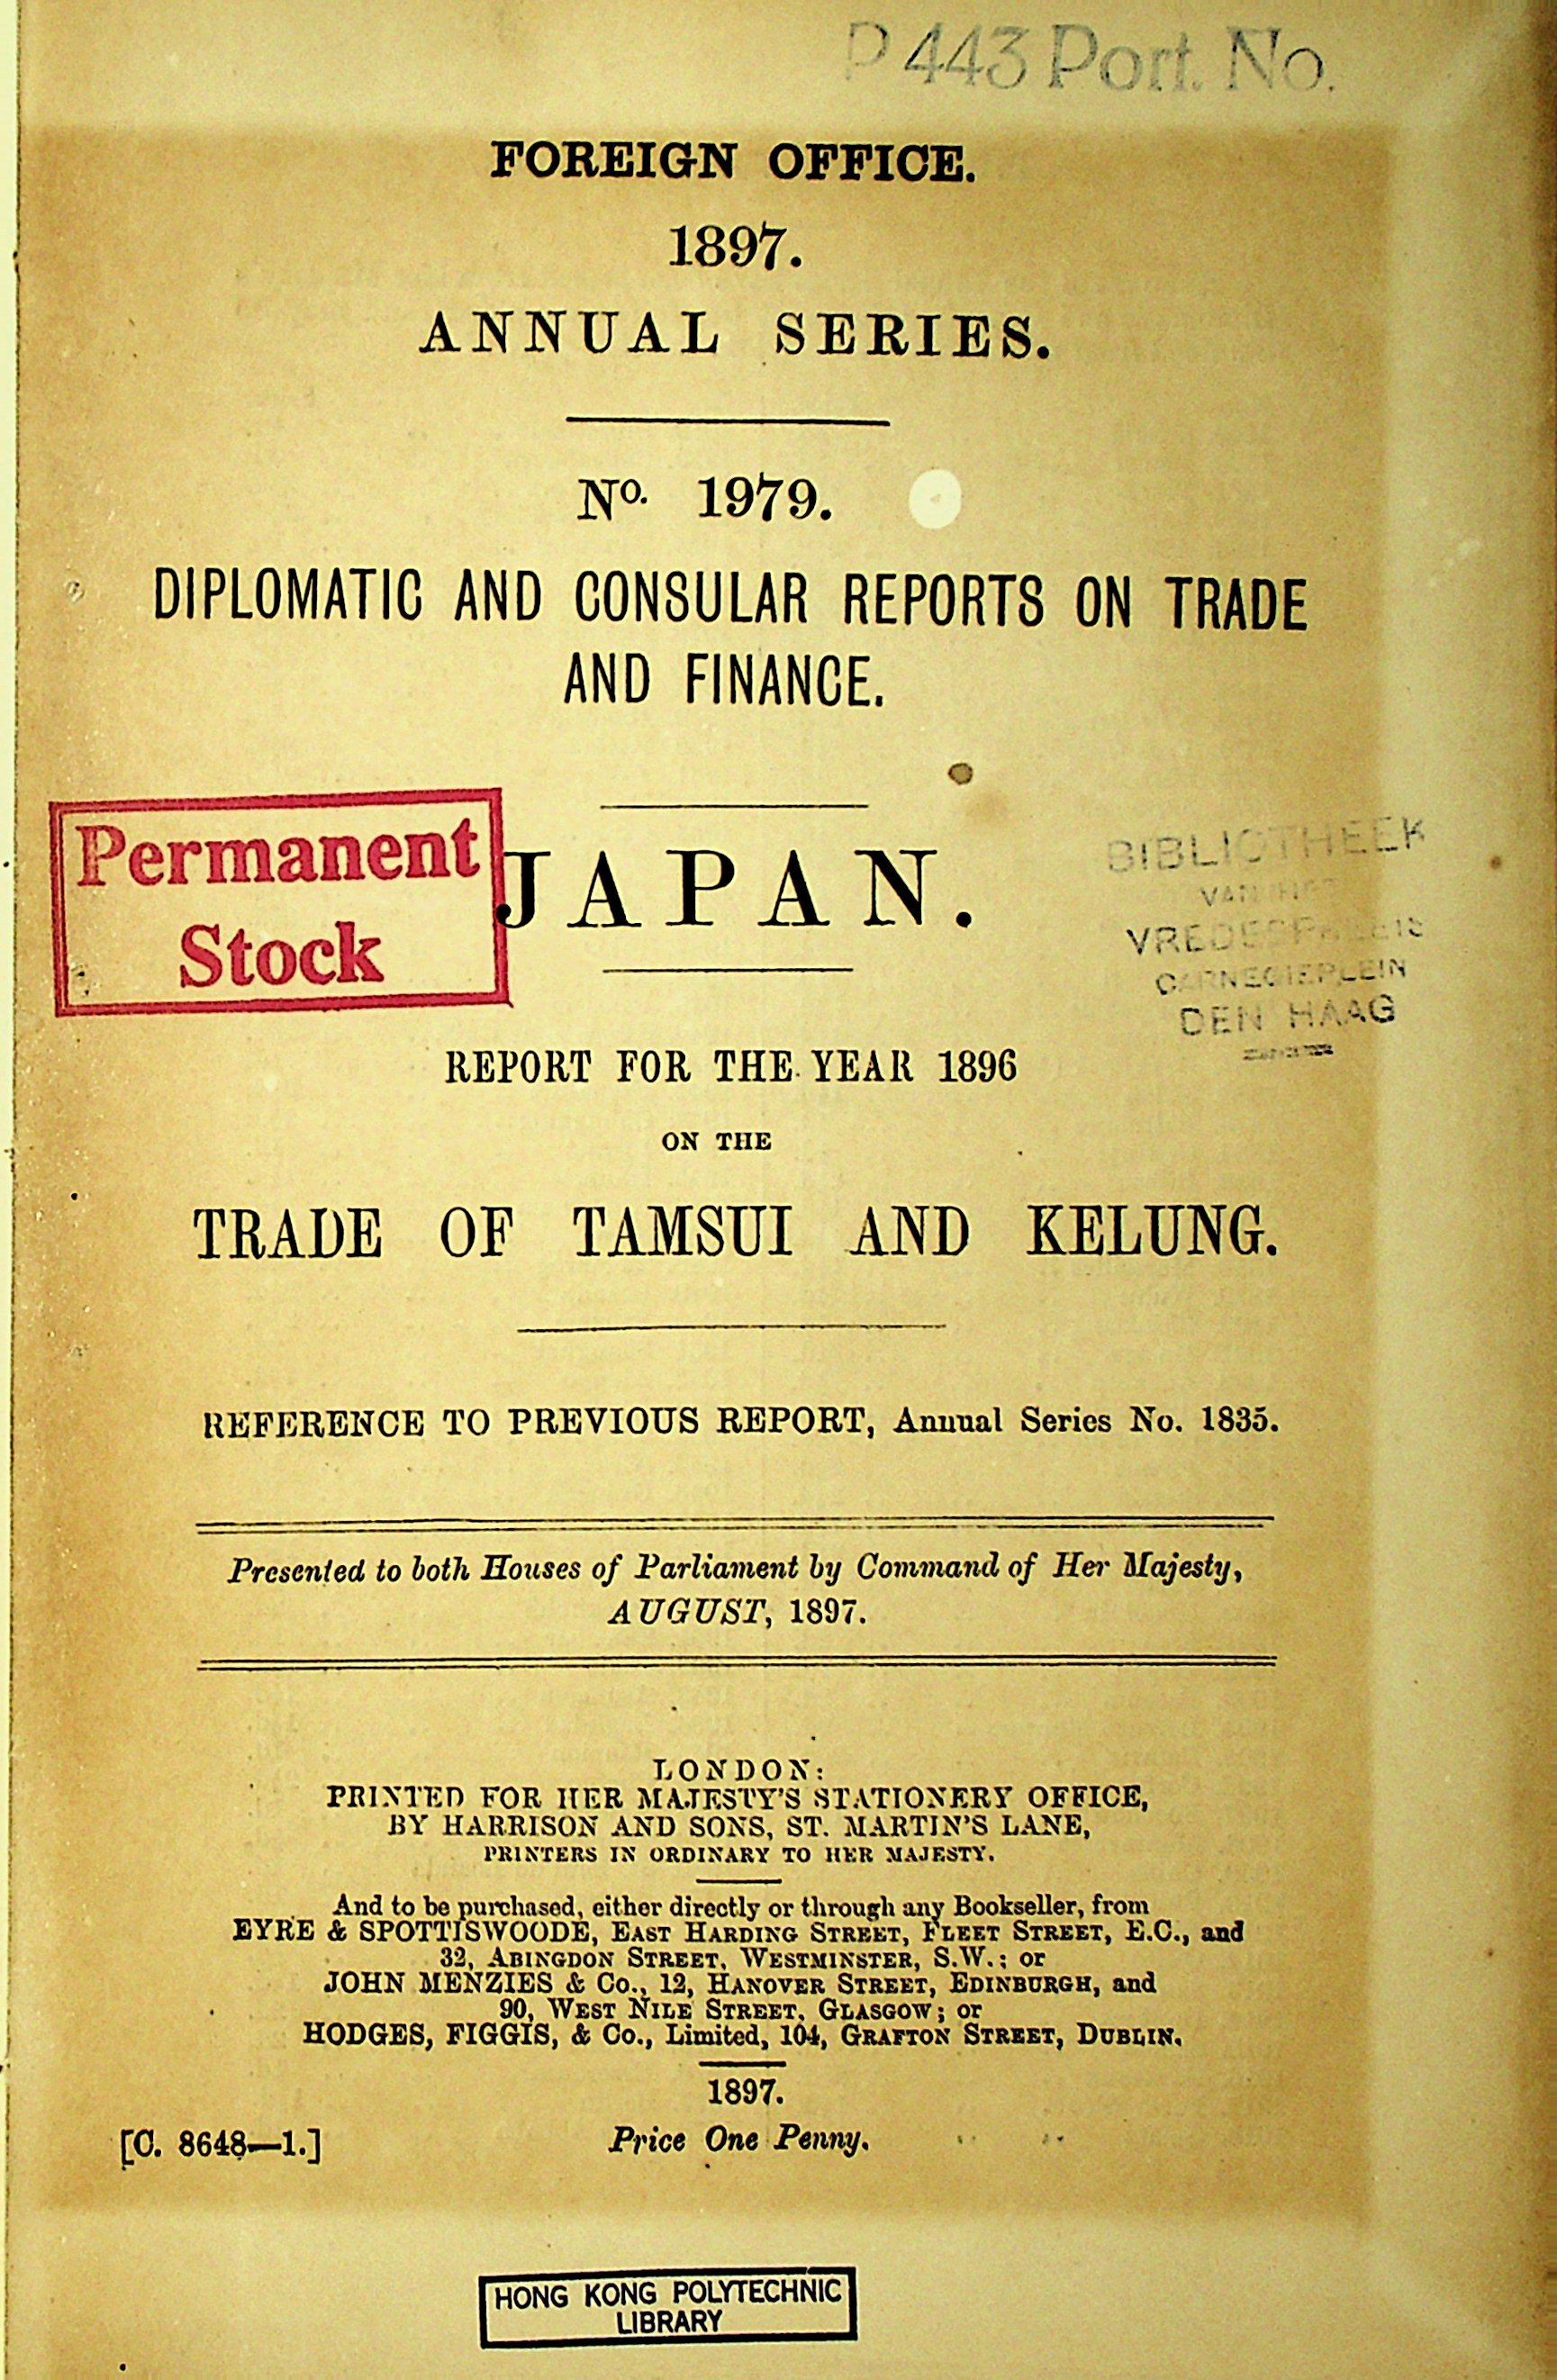 Japan : report for the year 1896 on the trade of Tamsui and Kelung